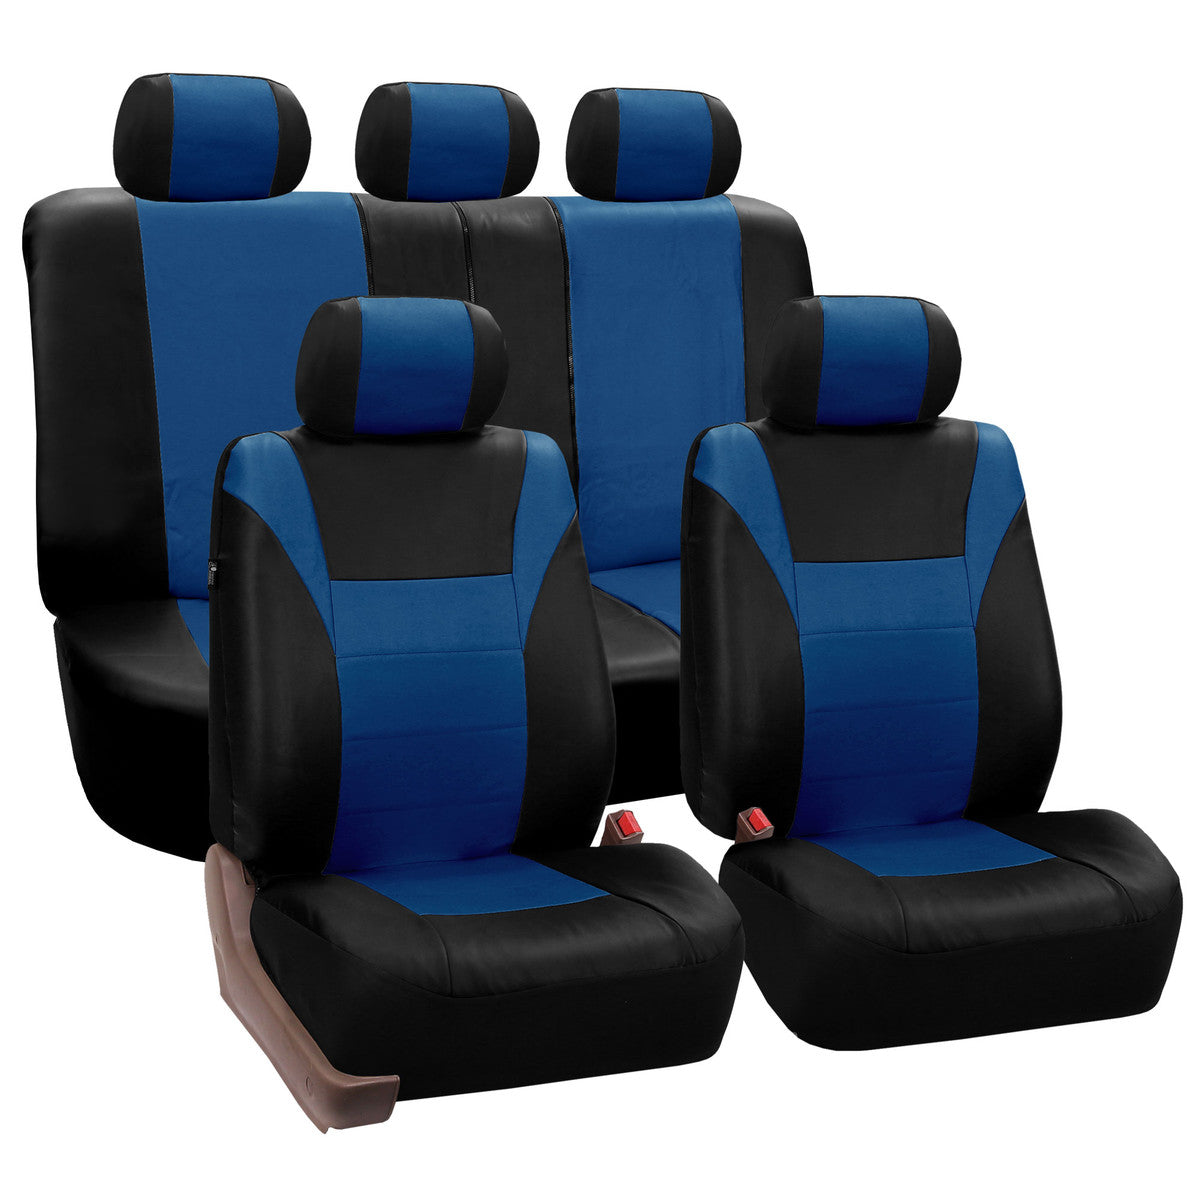 Racing PU Leather Seat Covers - Full Set Blue